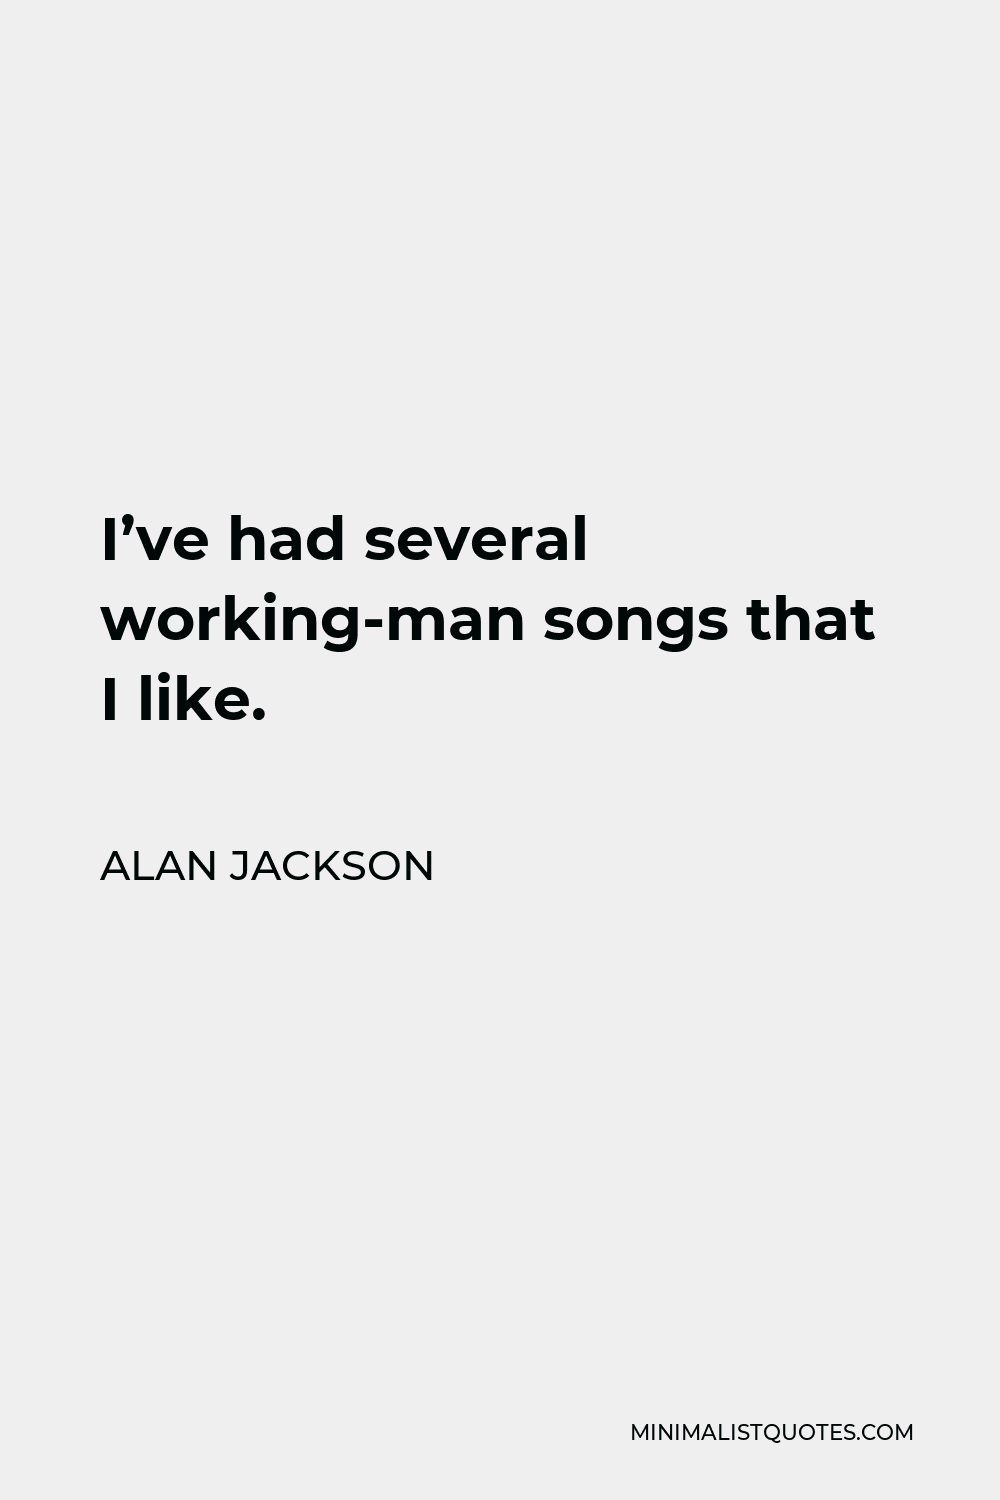 Alan Jackson Quote - I’ve had several working-man songs that I like.